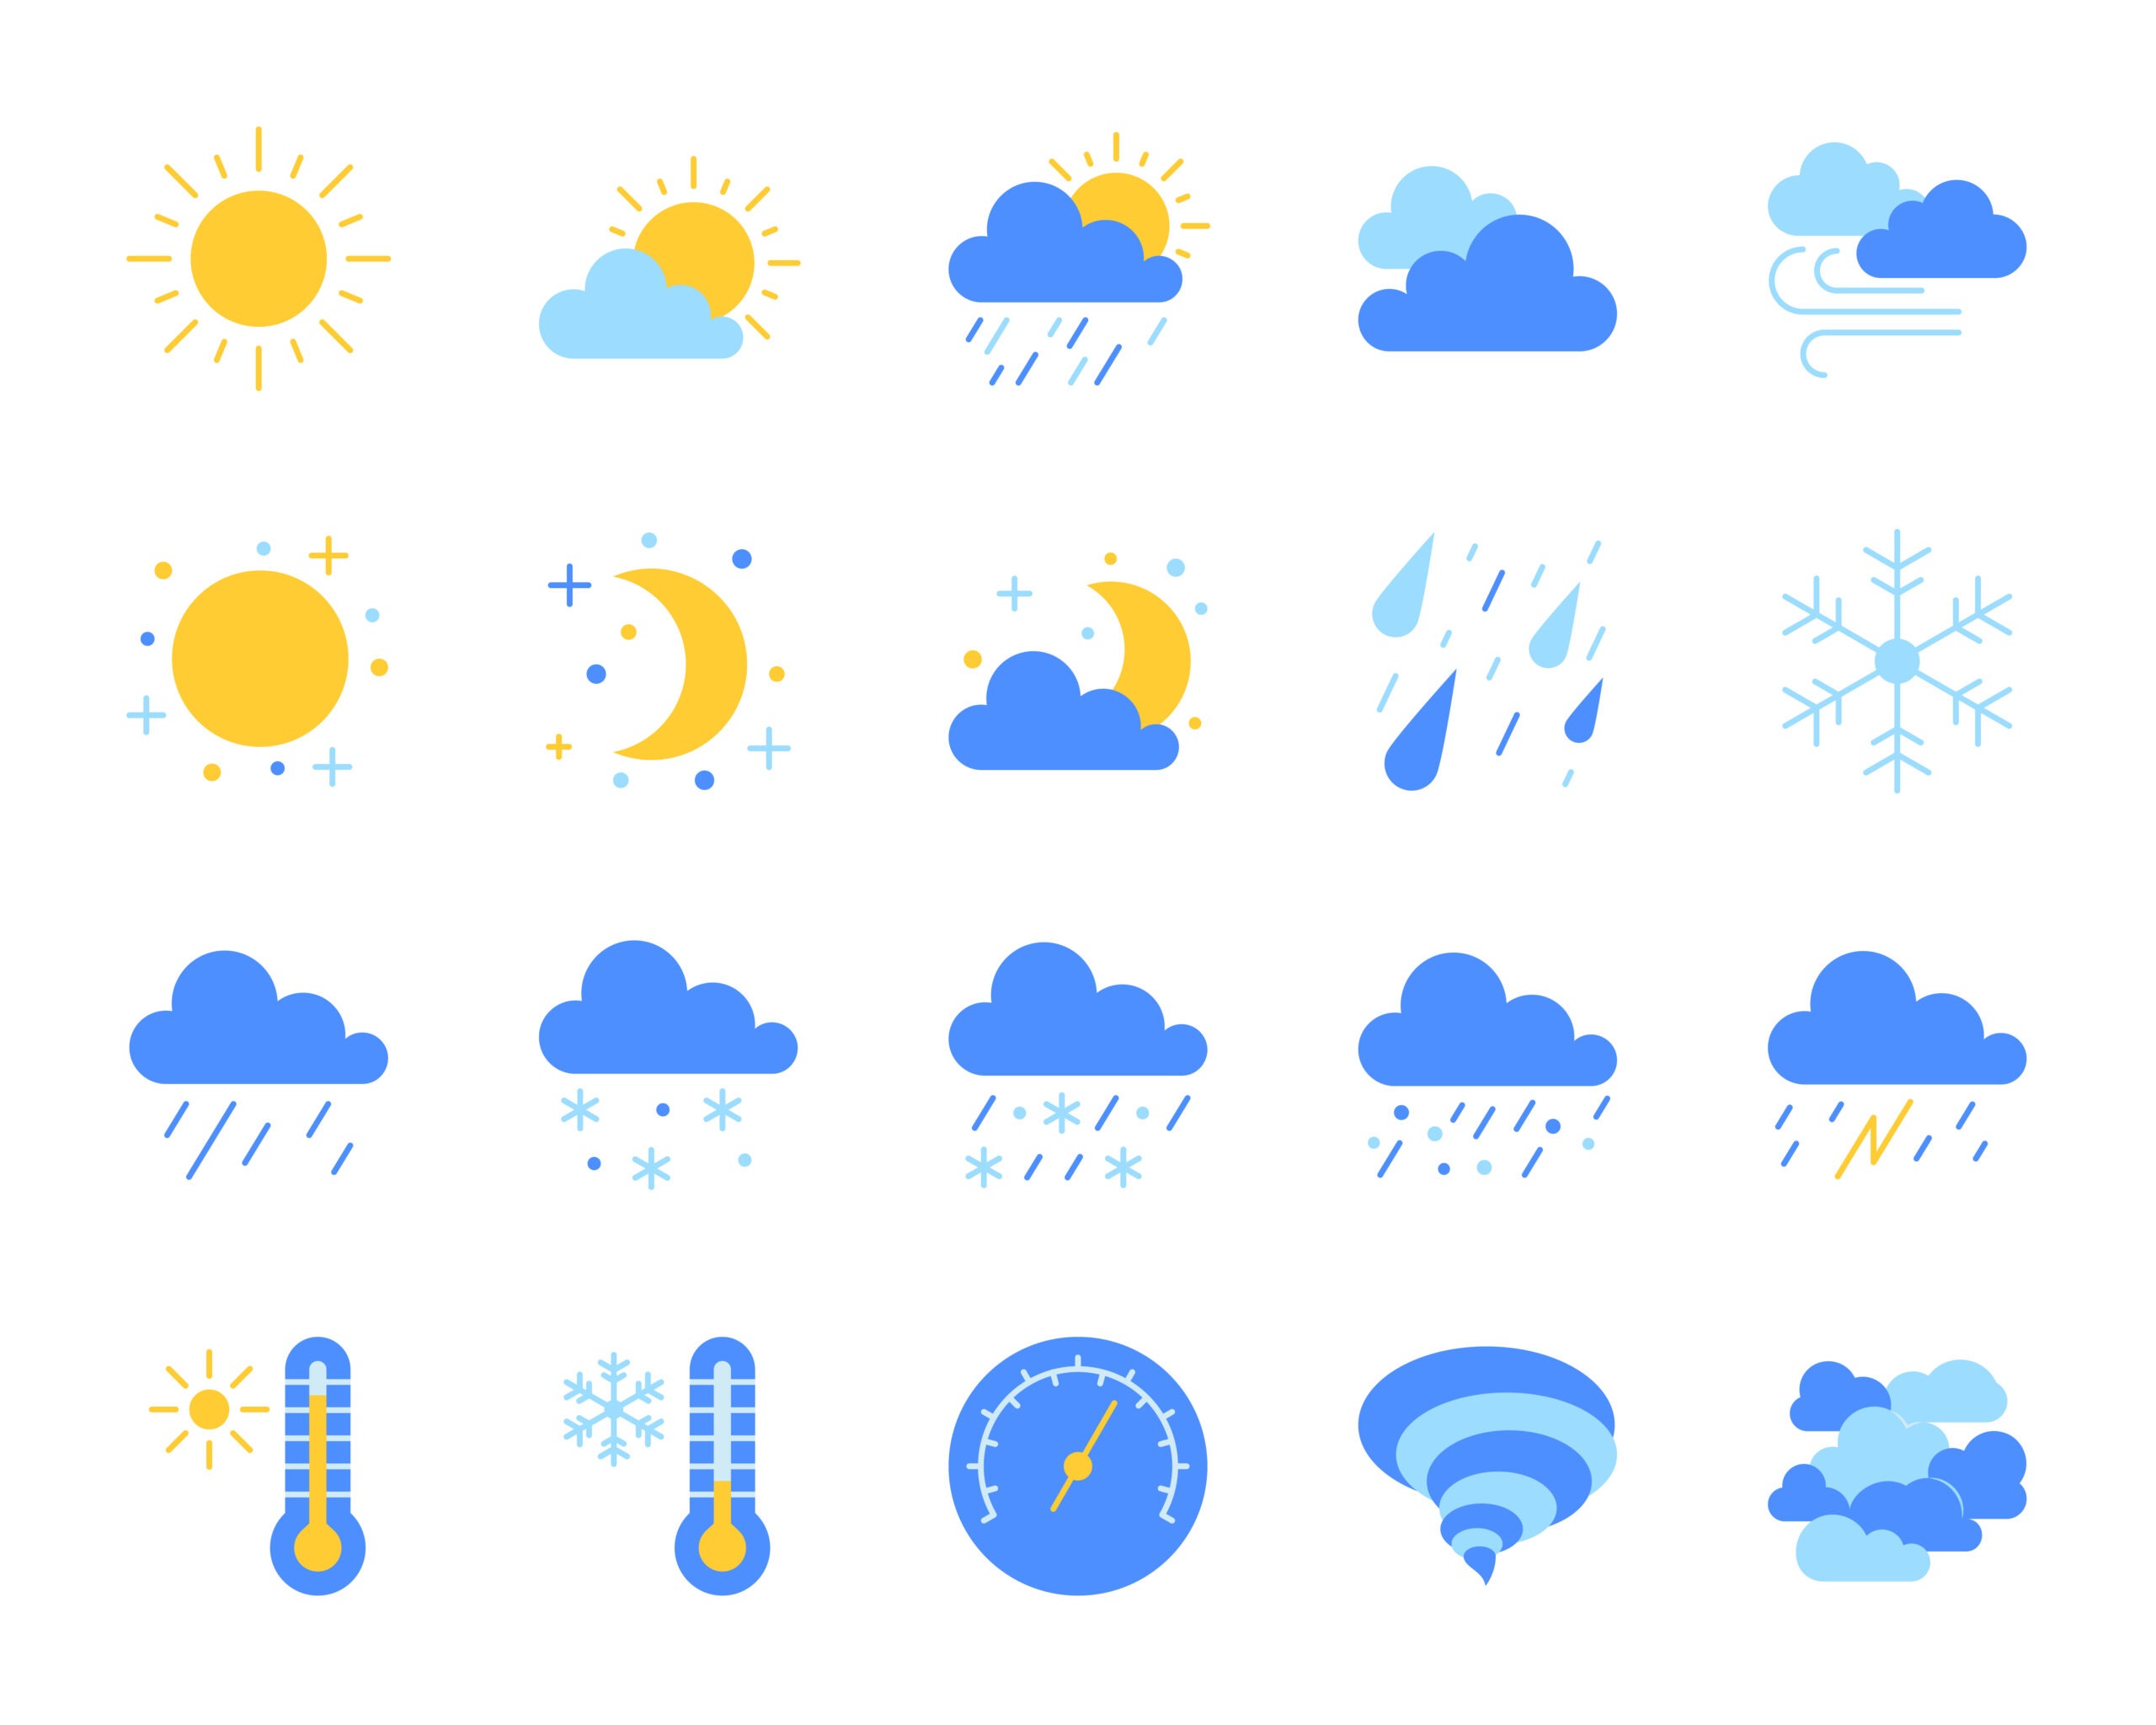 Pixels depicting different types of weather